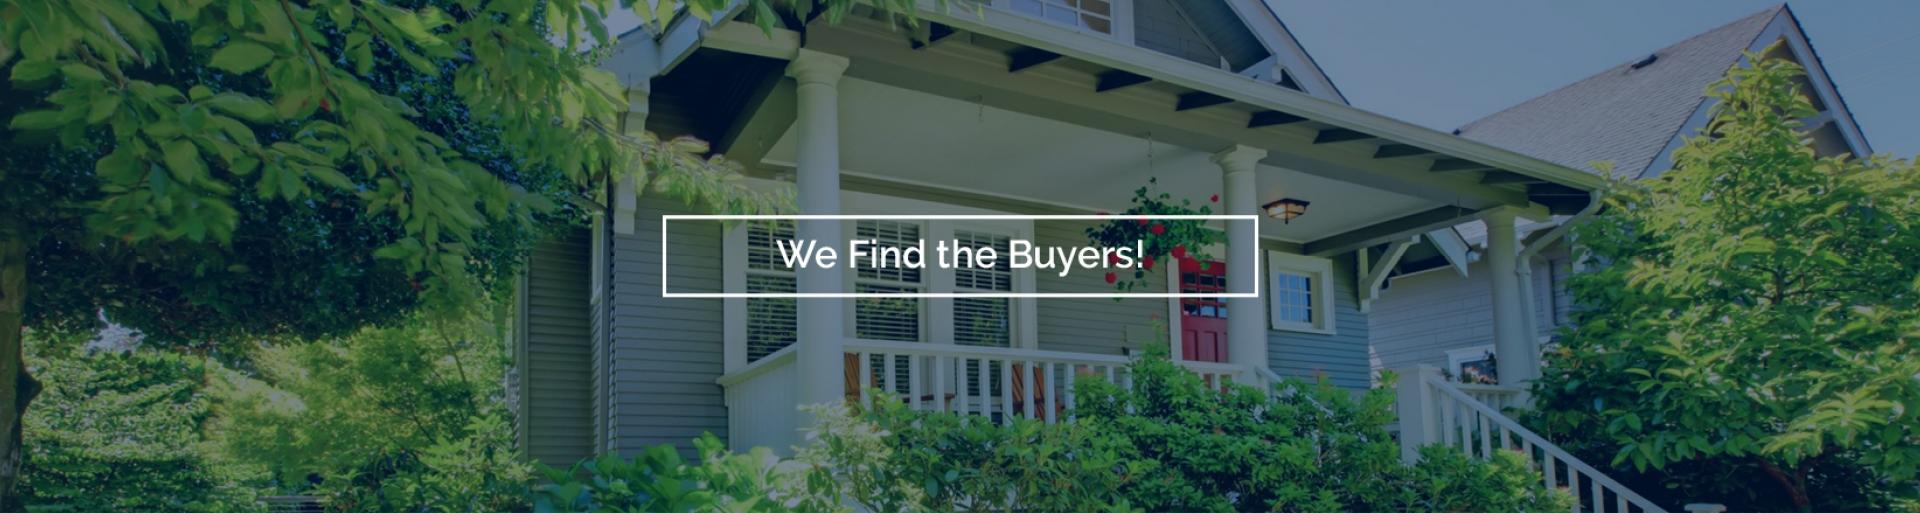 We Find the Buyers!